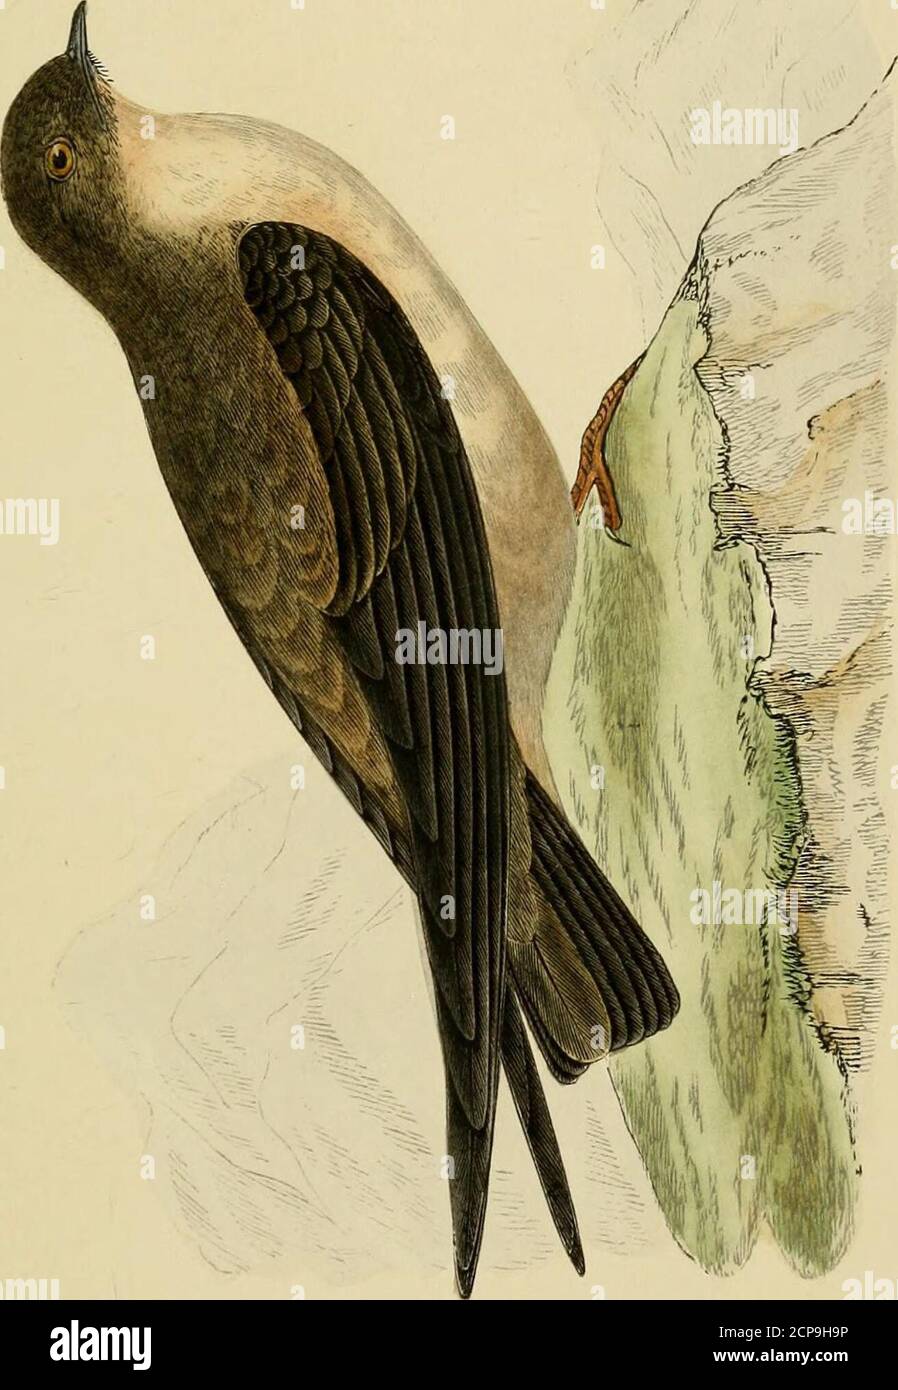 . A history of the birds of Europe, not observed in the British Isles . CKAG SWALLOW. Hirundo rupestris. Hirundo rupestris, Scopoli; 1768. montana et rupestris, Gmelin; 1788. Cotyle rupestris, Boie. Bonaparte. Ptyonoprogne rupestris, Bonaparte. Hirondelle de rocher, Of the French. Felsenschwalbe, Of the Germans. Sondine montana, Savi. Specific Characters.—Upper parts ash. grey, more or less darkaccording to age; primaries dark smoky brown; tail dark brown,the two upper and two most external tail feathers unicolorous;all the others having a large round white spot on the innerweb. Length of tip Stock Photo